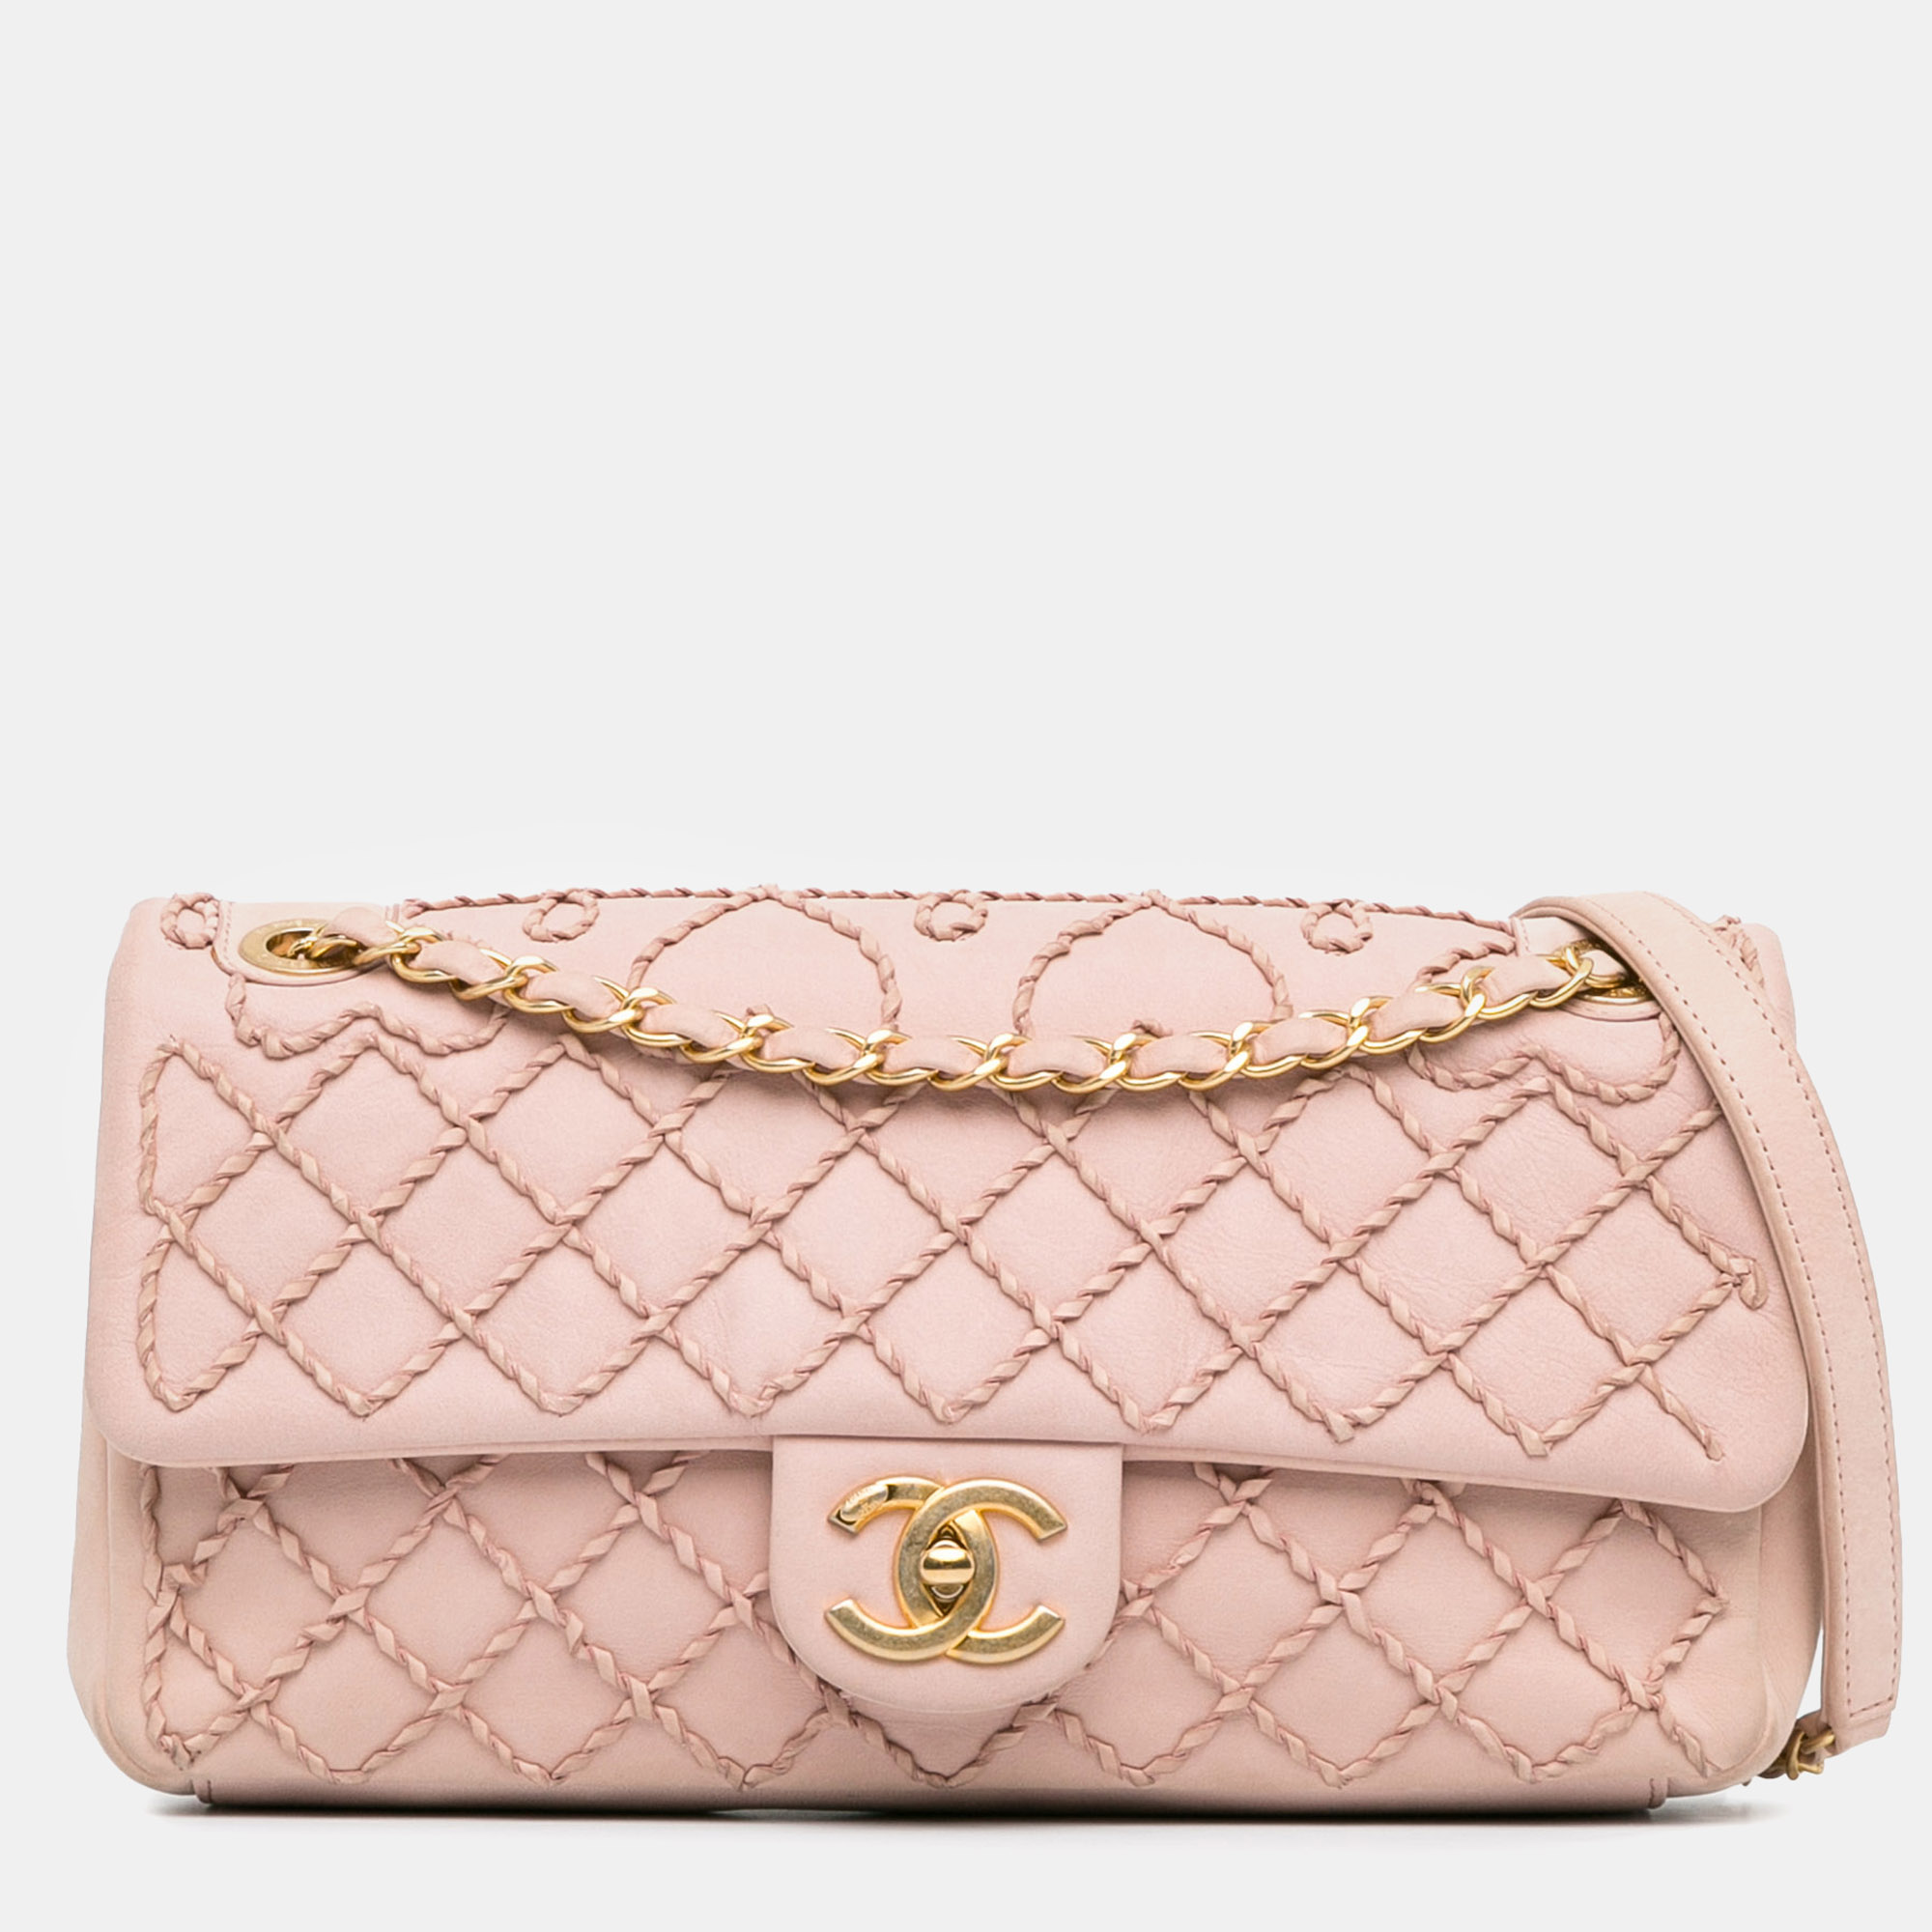 Chanel twist quilted heart flap